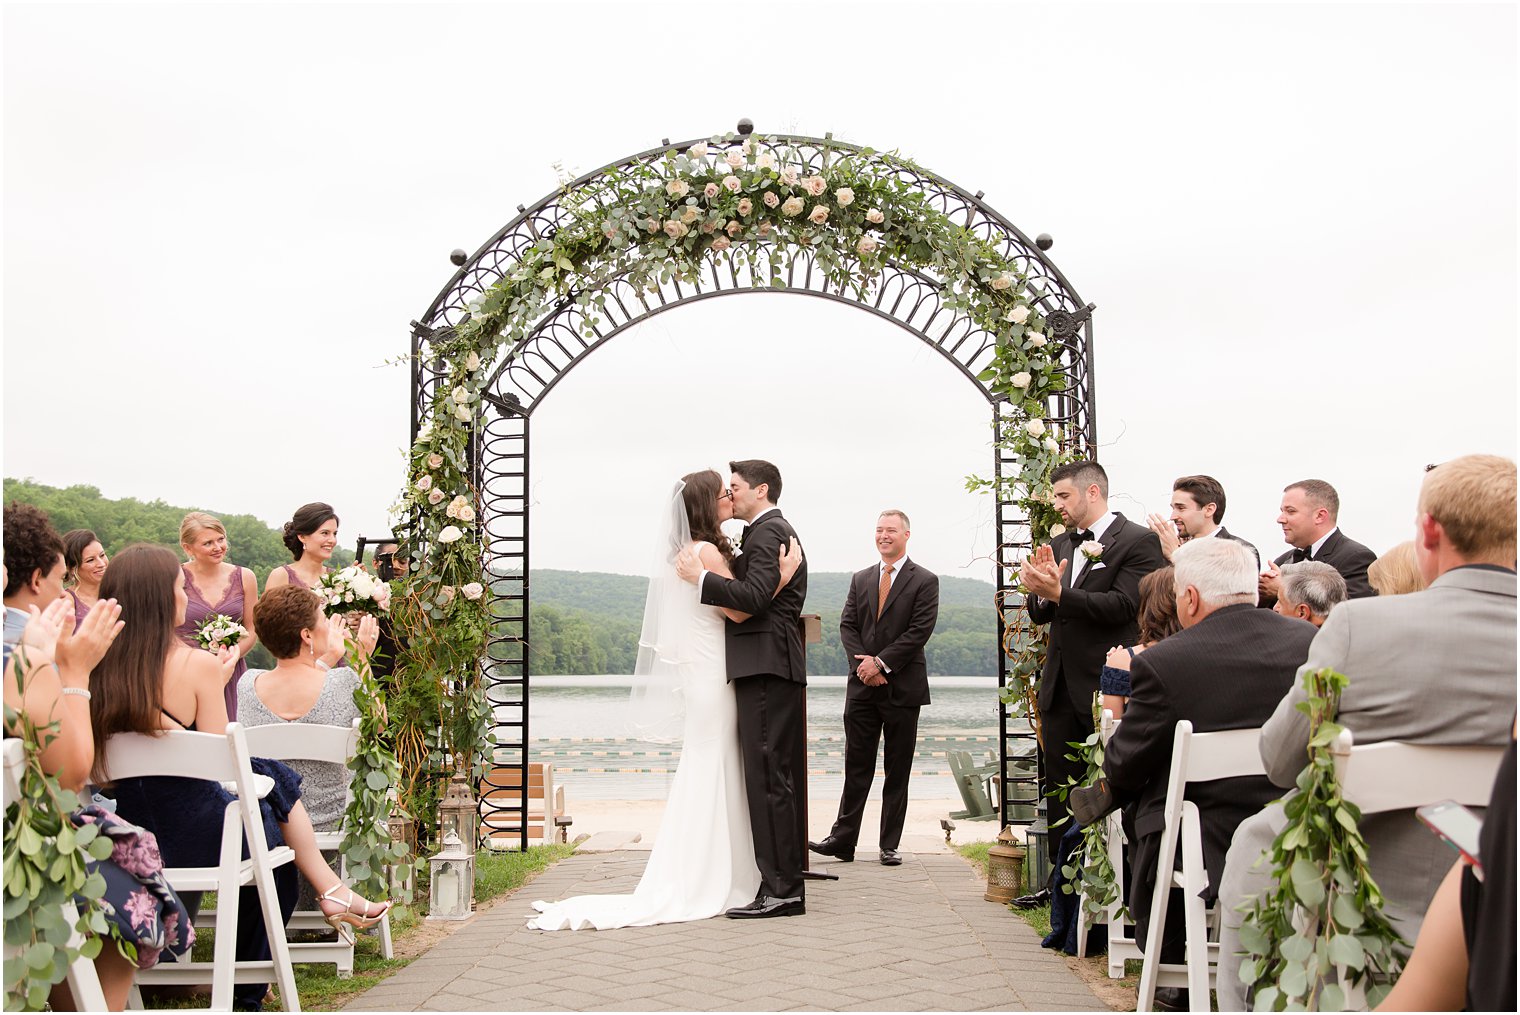 Outdoor ceremony at Lake Valhalla Club in Montville NJ